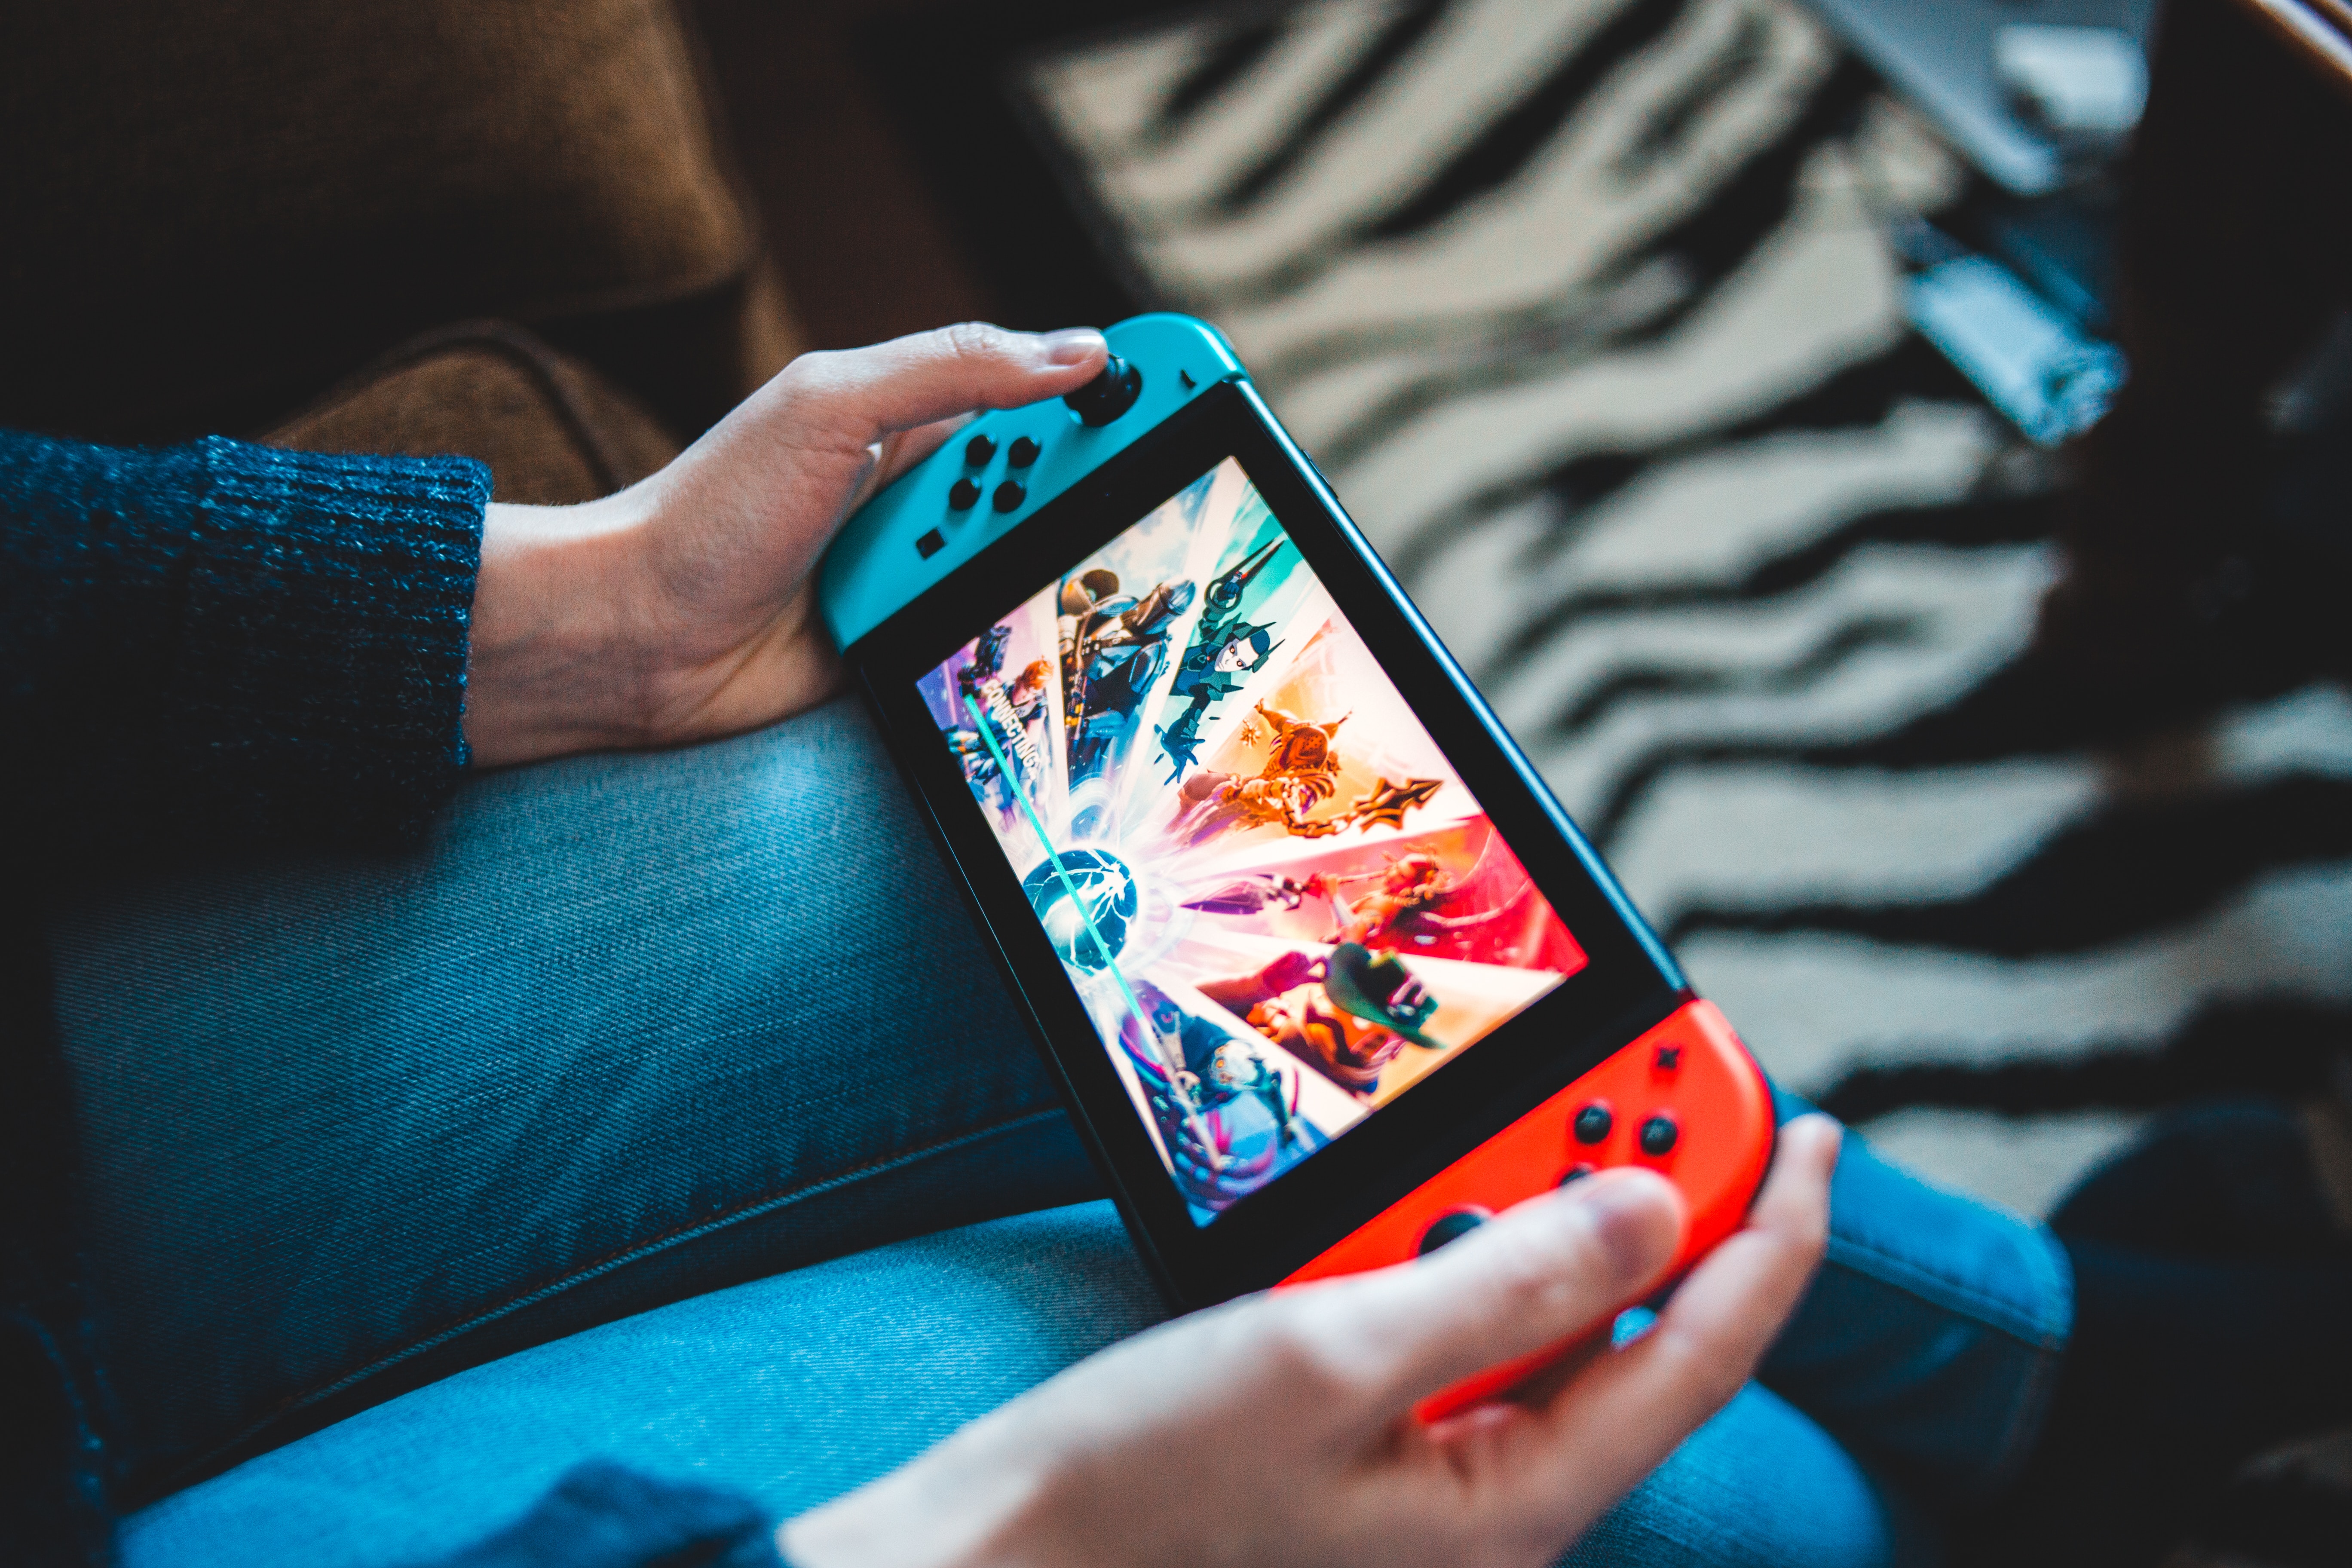 How to Find a Lost Nintendo Switch: 5 Easy Ways